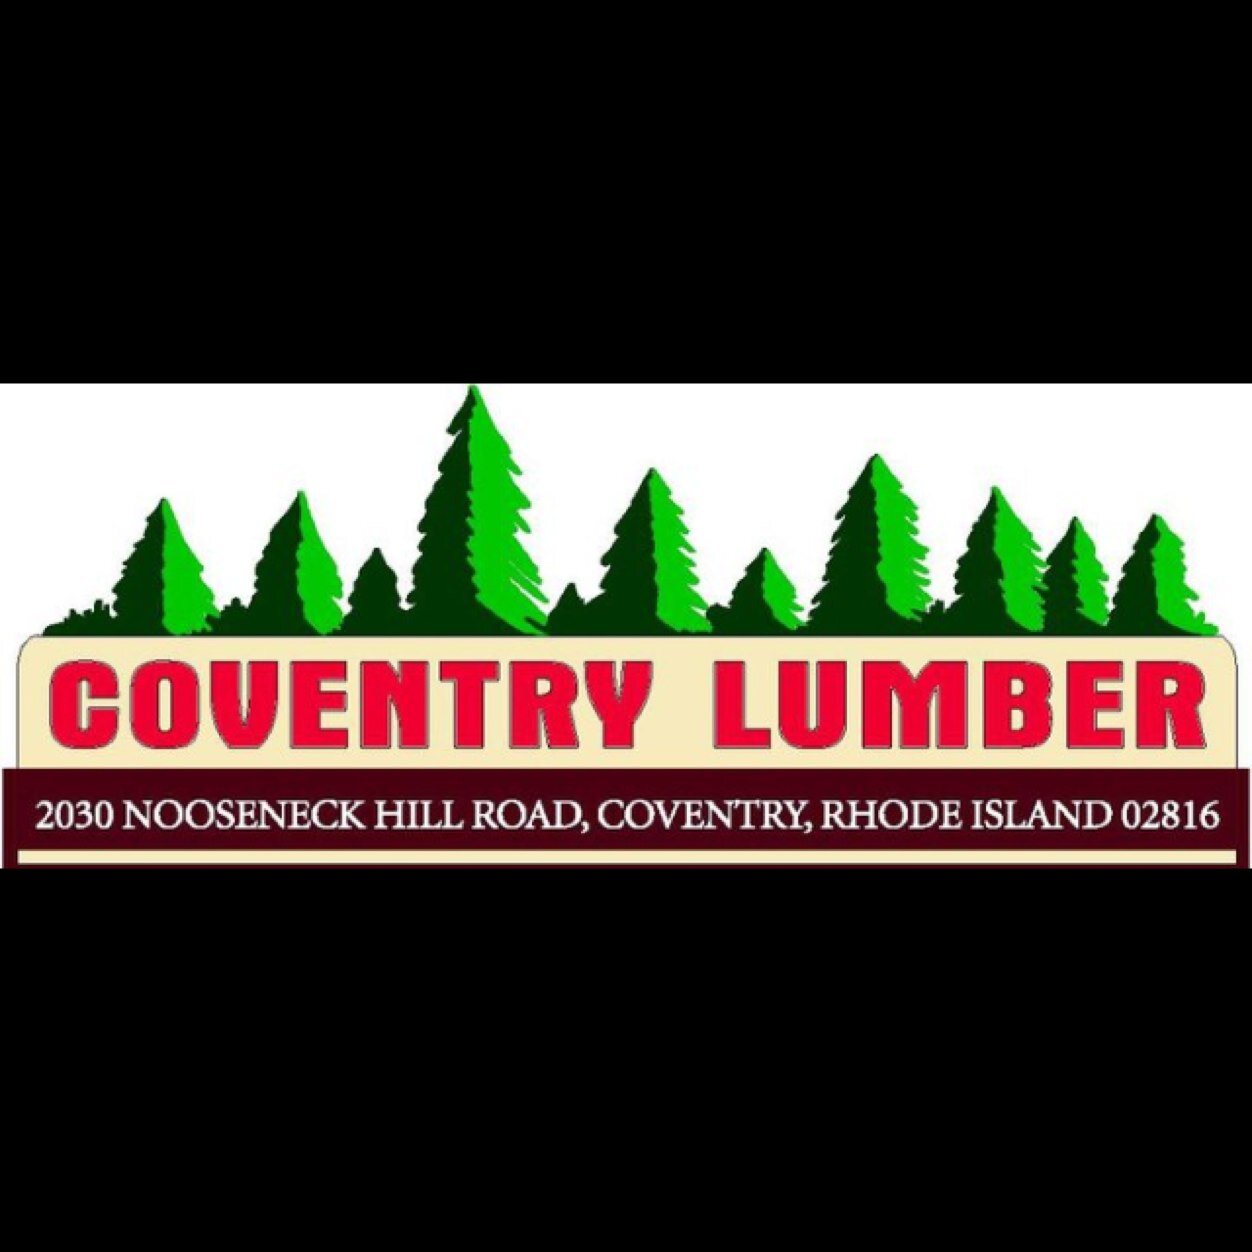 Established in 1969, Coventry Lumber has built a reputation on the ability to “provide our customers with quality products and professional service”.